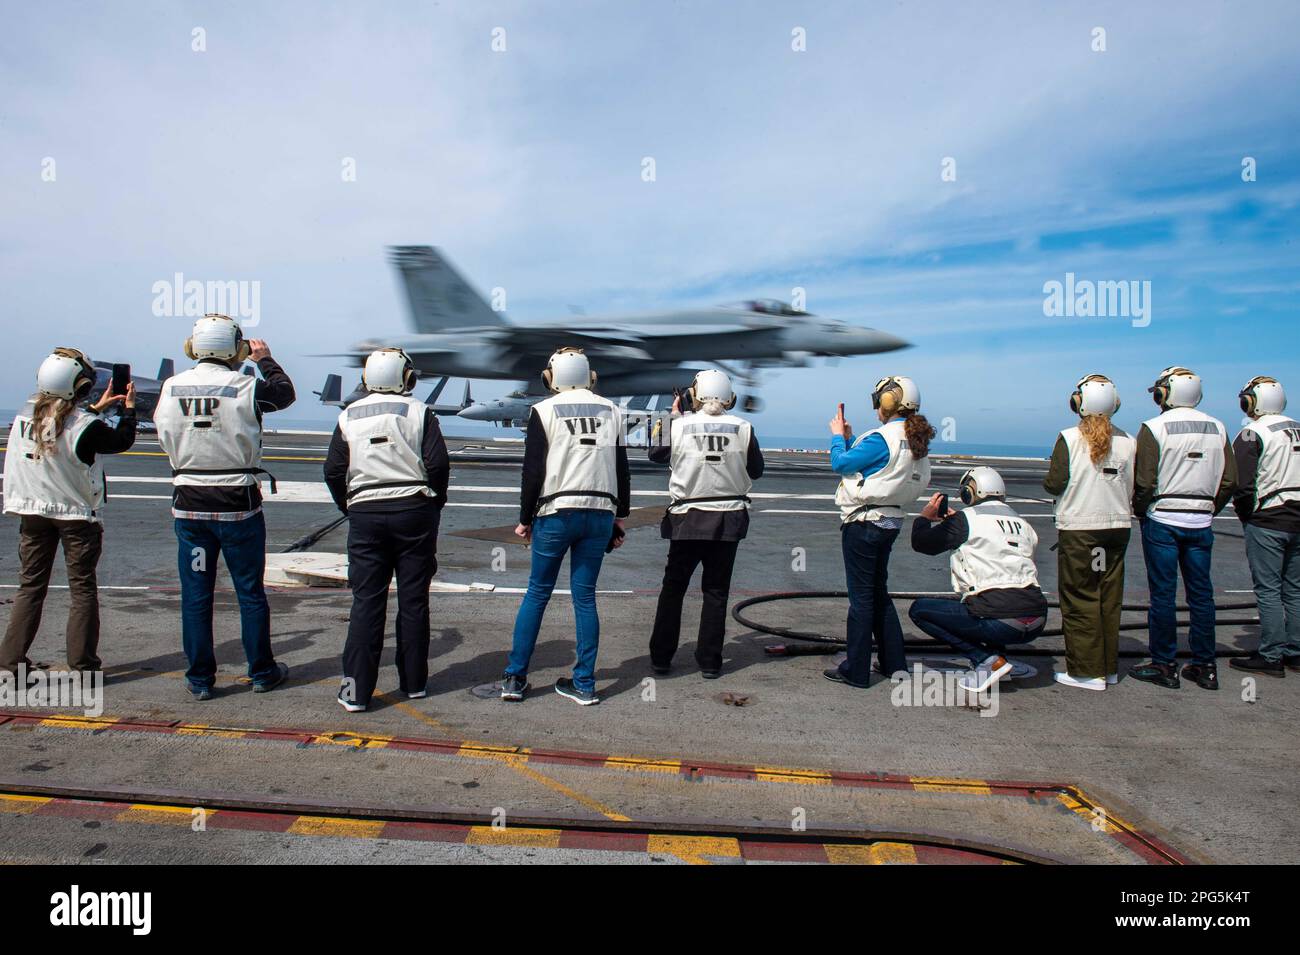 230318-N-PQ495-1056 PACIFIC OCEAN (March 18, 2023) Distinguished visitors observe an F/A-18E Super Hornet, assigned to the “Golden Dragons” Strike Fighter Squadron (VFA) 192, recover on the flight deck of Nimitz-class aircraft carrier USS Carl Vinson (CVN 70). Vinson is currently underway conducting routine maritime operations. (U.S. Navy photo by Mass Communication Specialist 3rd Class Larissa T. Dougherty) Stock Photo